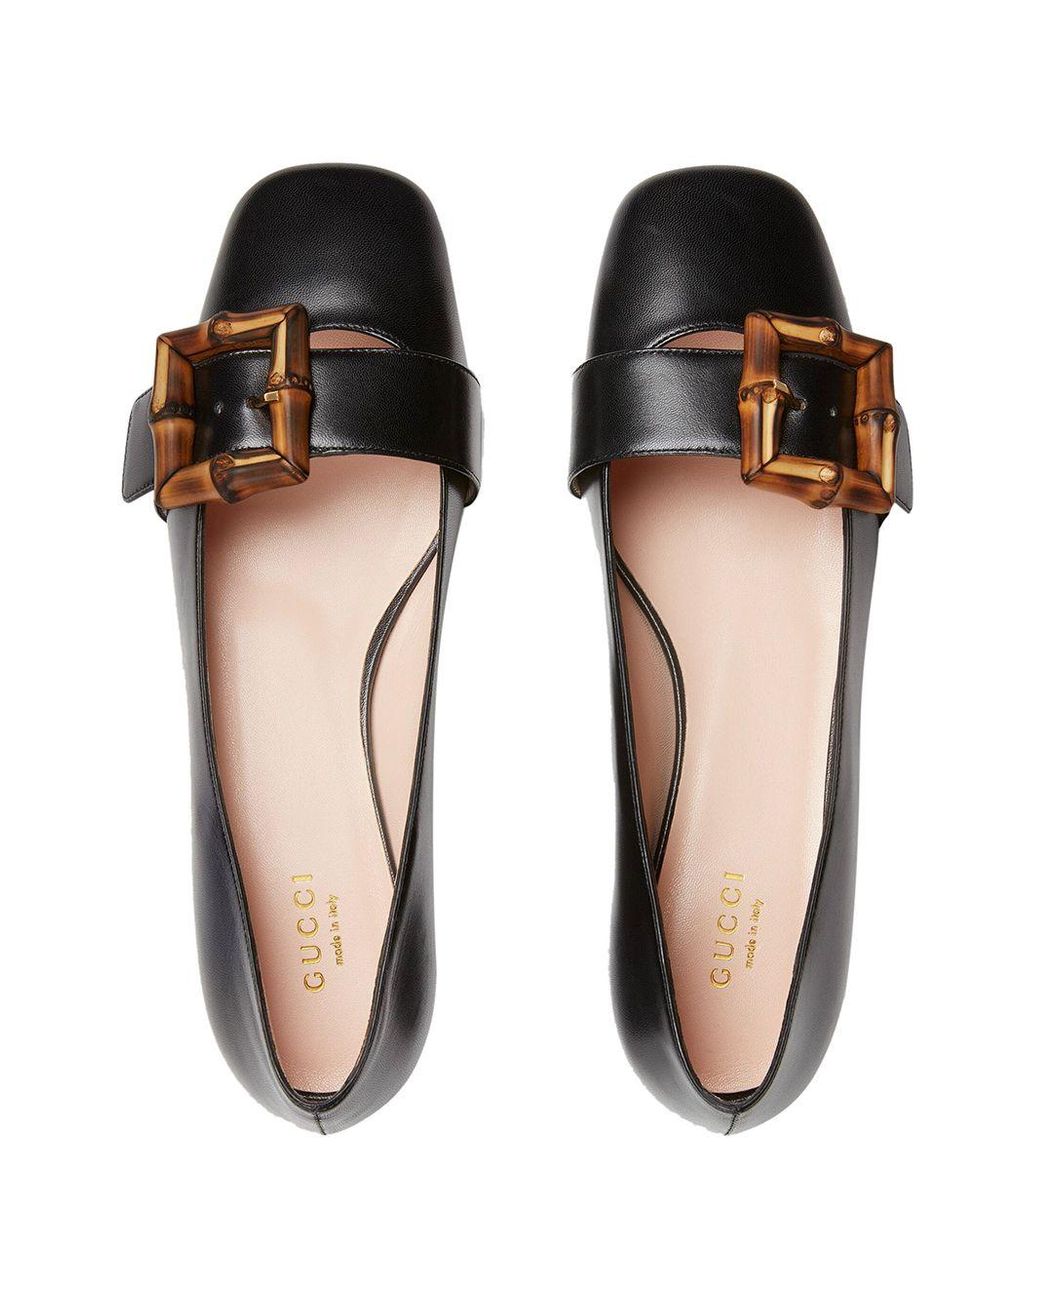 Gucci Bamboo-buckle Ballerina Shoes in Black | Lyst